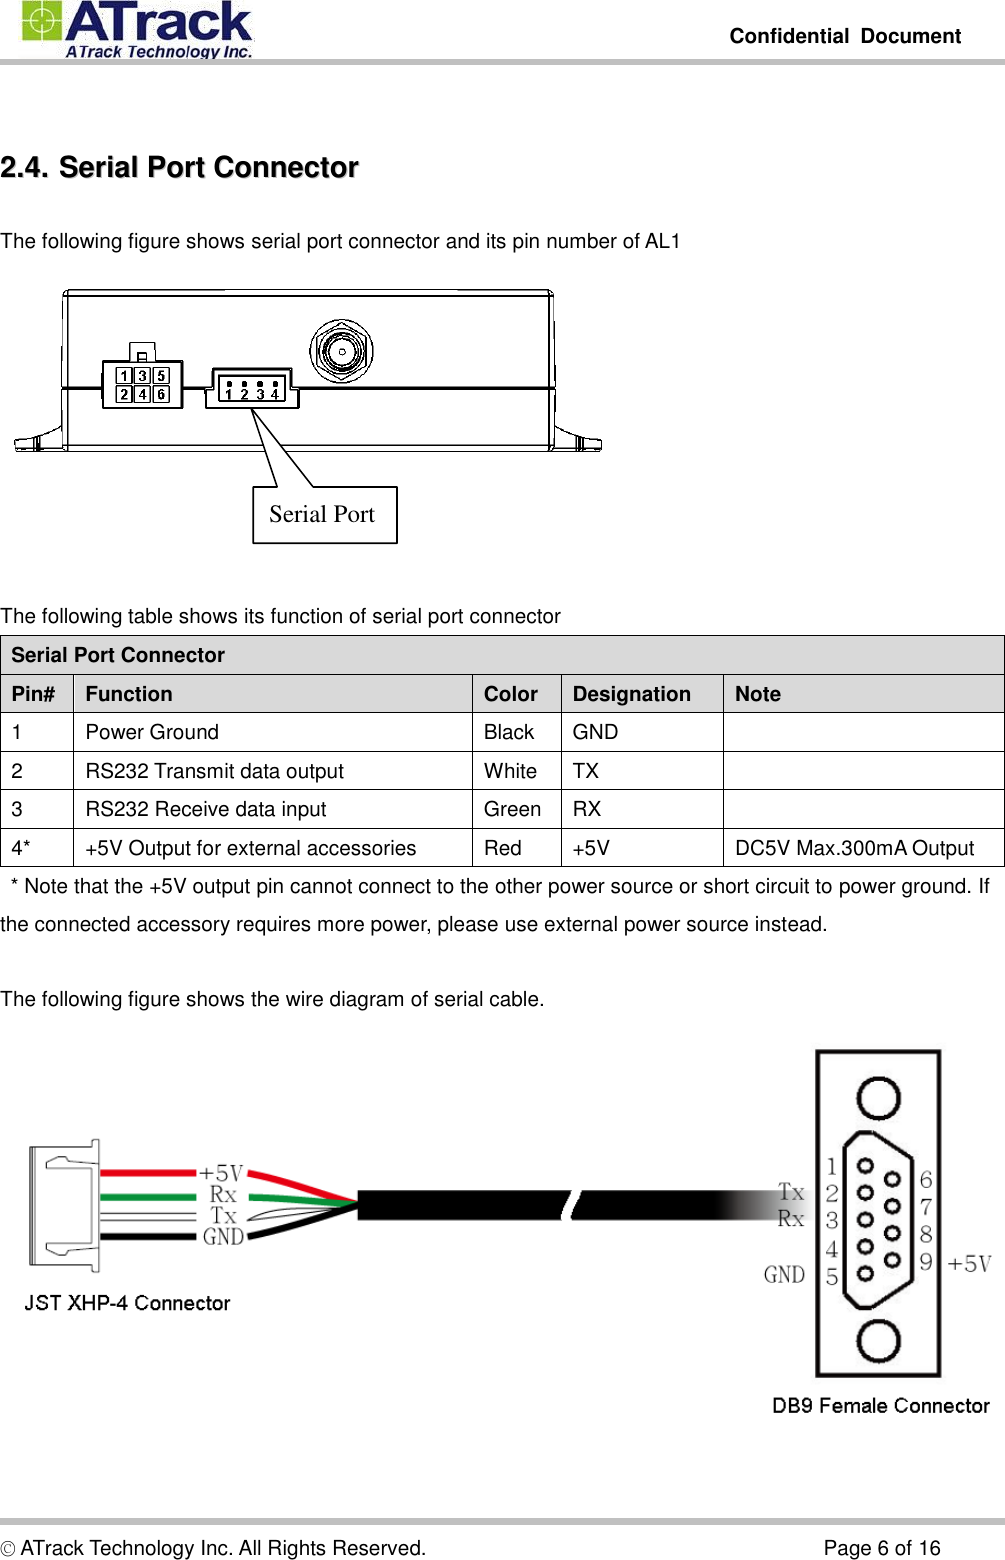         Confidential  Document  © ATrack Technology Inc. All Rights Reserved.                                                                            Page 6 of 16  22..44..  SSeerriiaall  PPoorrtt  CCoonnnneeccttoorr  The following figure shows serial port connector and its pin number of AL1     The following table shows its function of serial port connector Serial Port Connector Pin# Function Color Designation Note 1 Power Ground Black GND  2 RS232 Transmit data output White TX  3 RS232 Receive data input Green RX  4* +5V Output for external accessories Red +5V DC5V Max.300mA Output   * Note that the +5V output pin cannot connect to the other power source or short circuit to power ground. If the connected accessory requires more power, please use external power source instead.  The following figure shows the wire diagram of serial cable.  Serial Port 